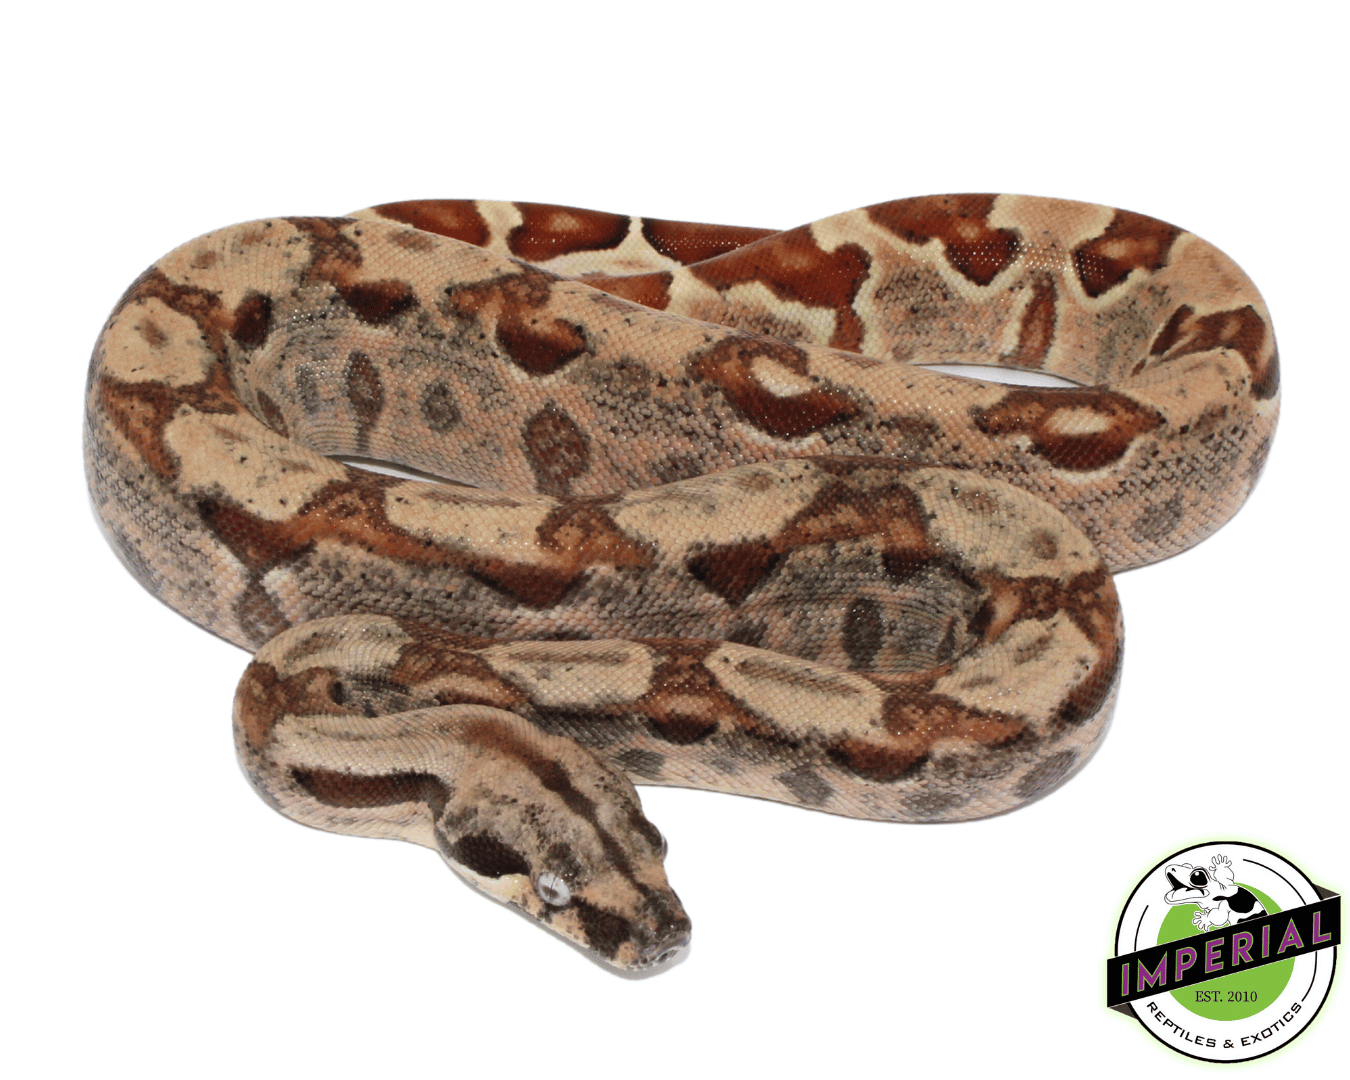 boa constrictor for sale, buy reptiles online